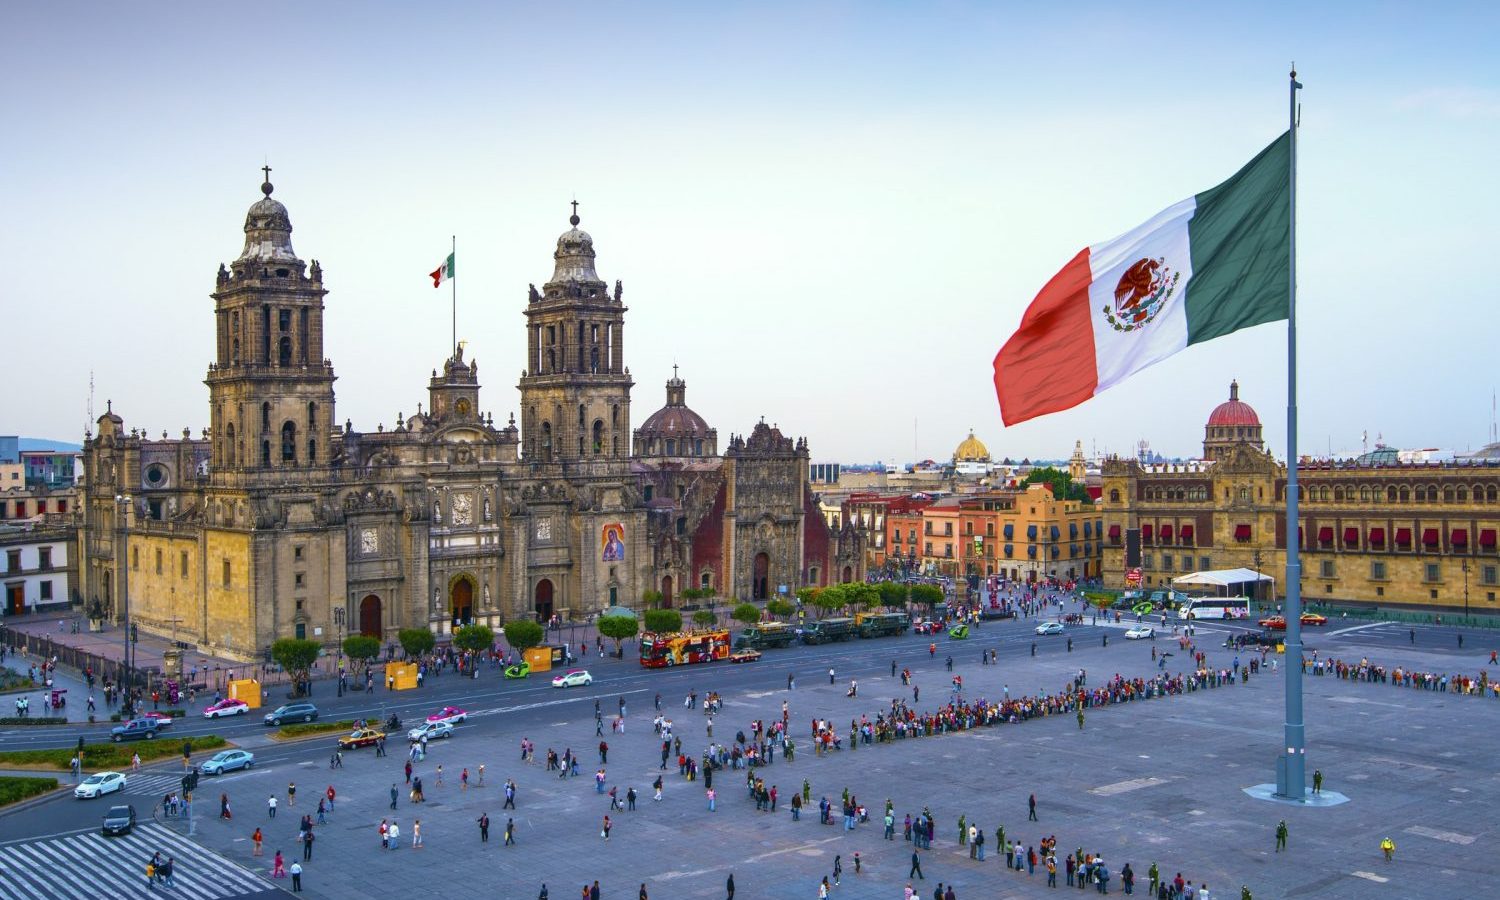 Mexico's Cannabis Legalization Bill Will Boost Business, But There Are Concerns